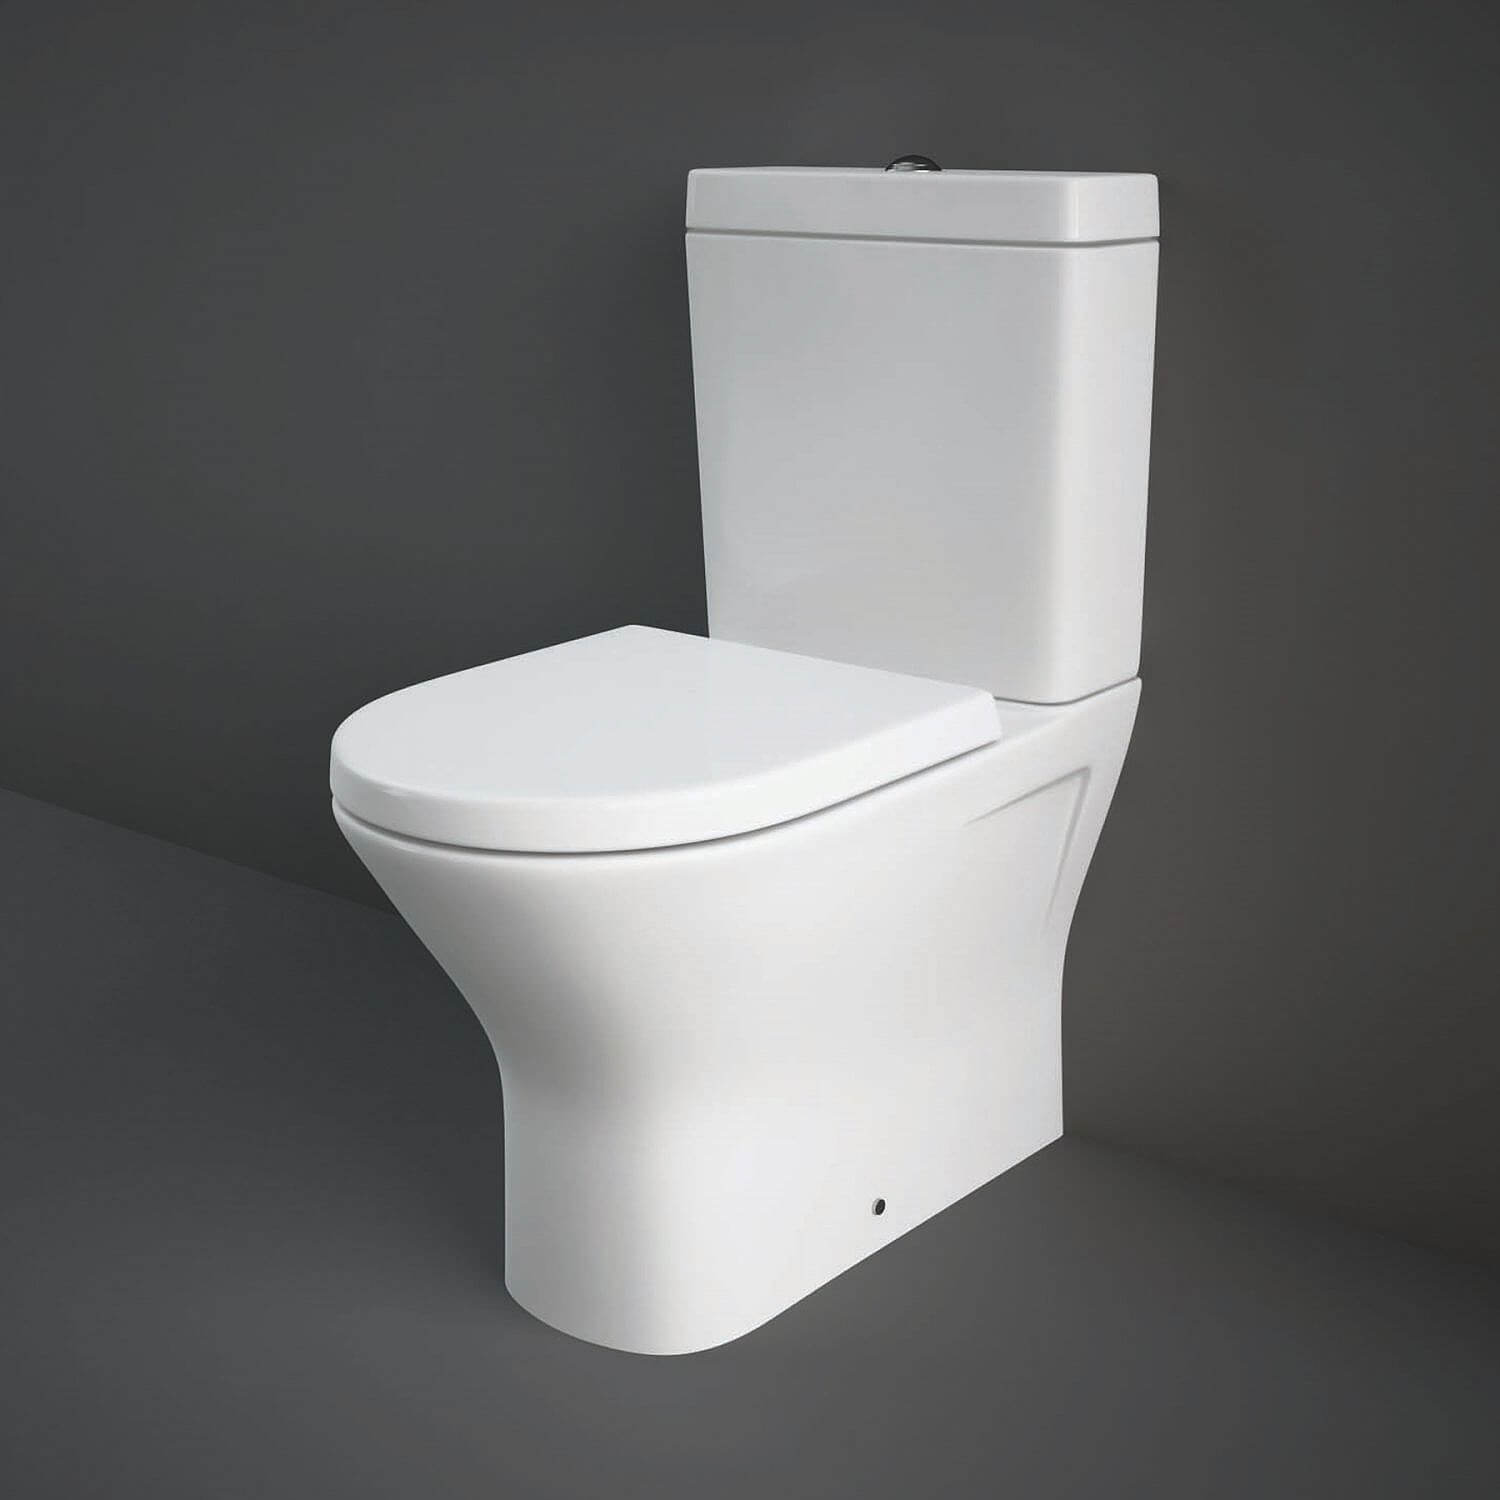 SENZA S/PROJECTION RIMLESS WC PACK - Bathroom & Heating leading